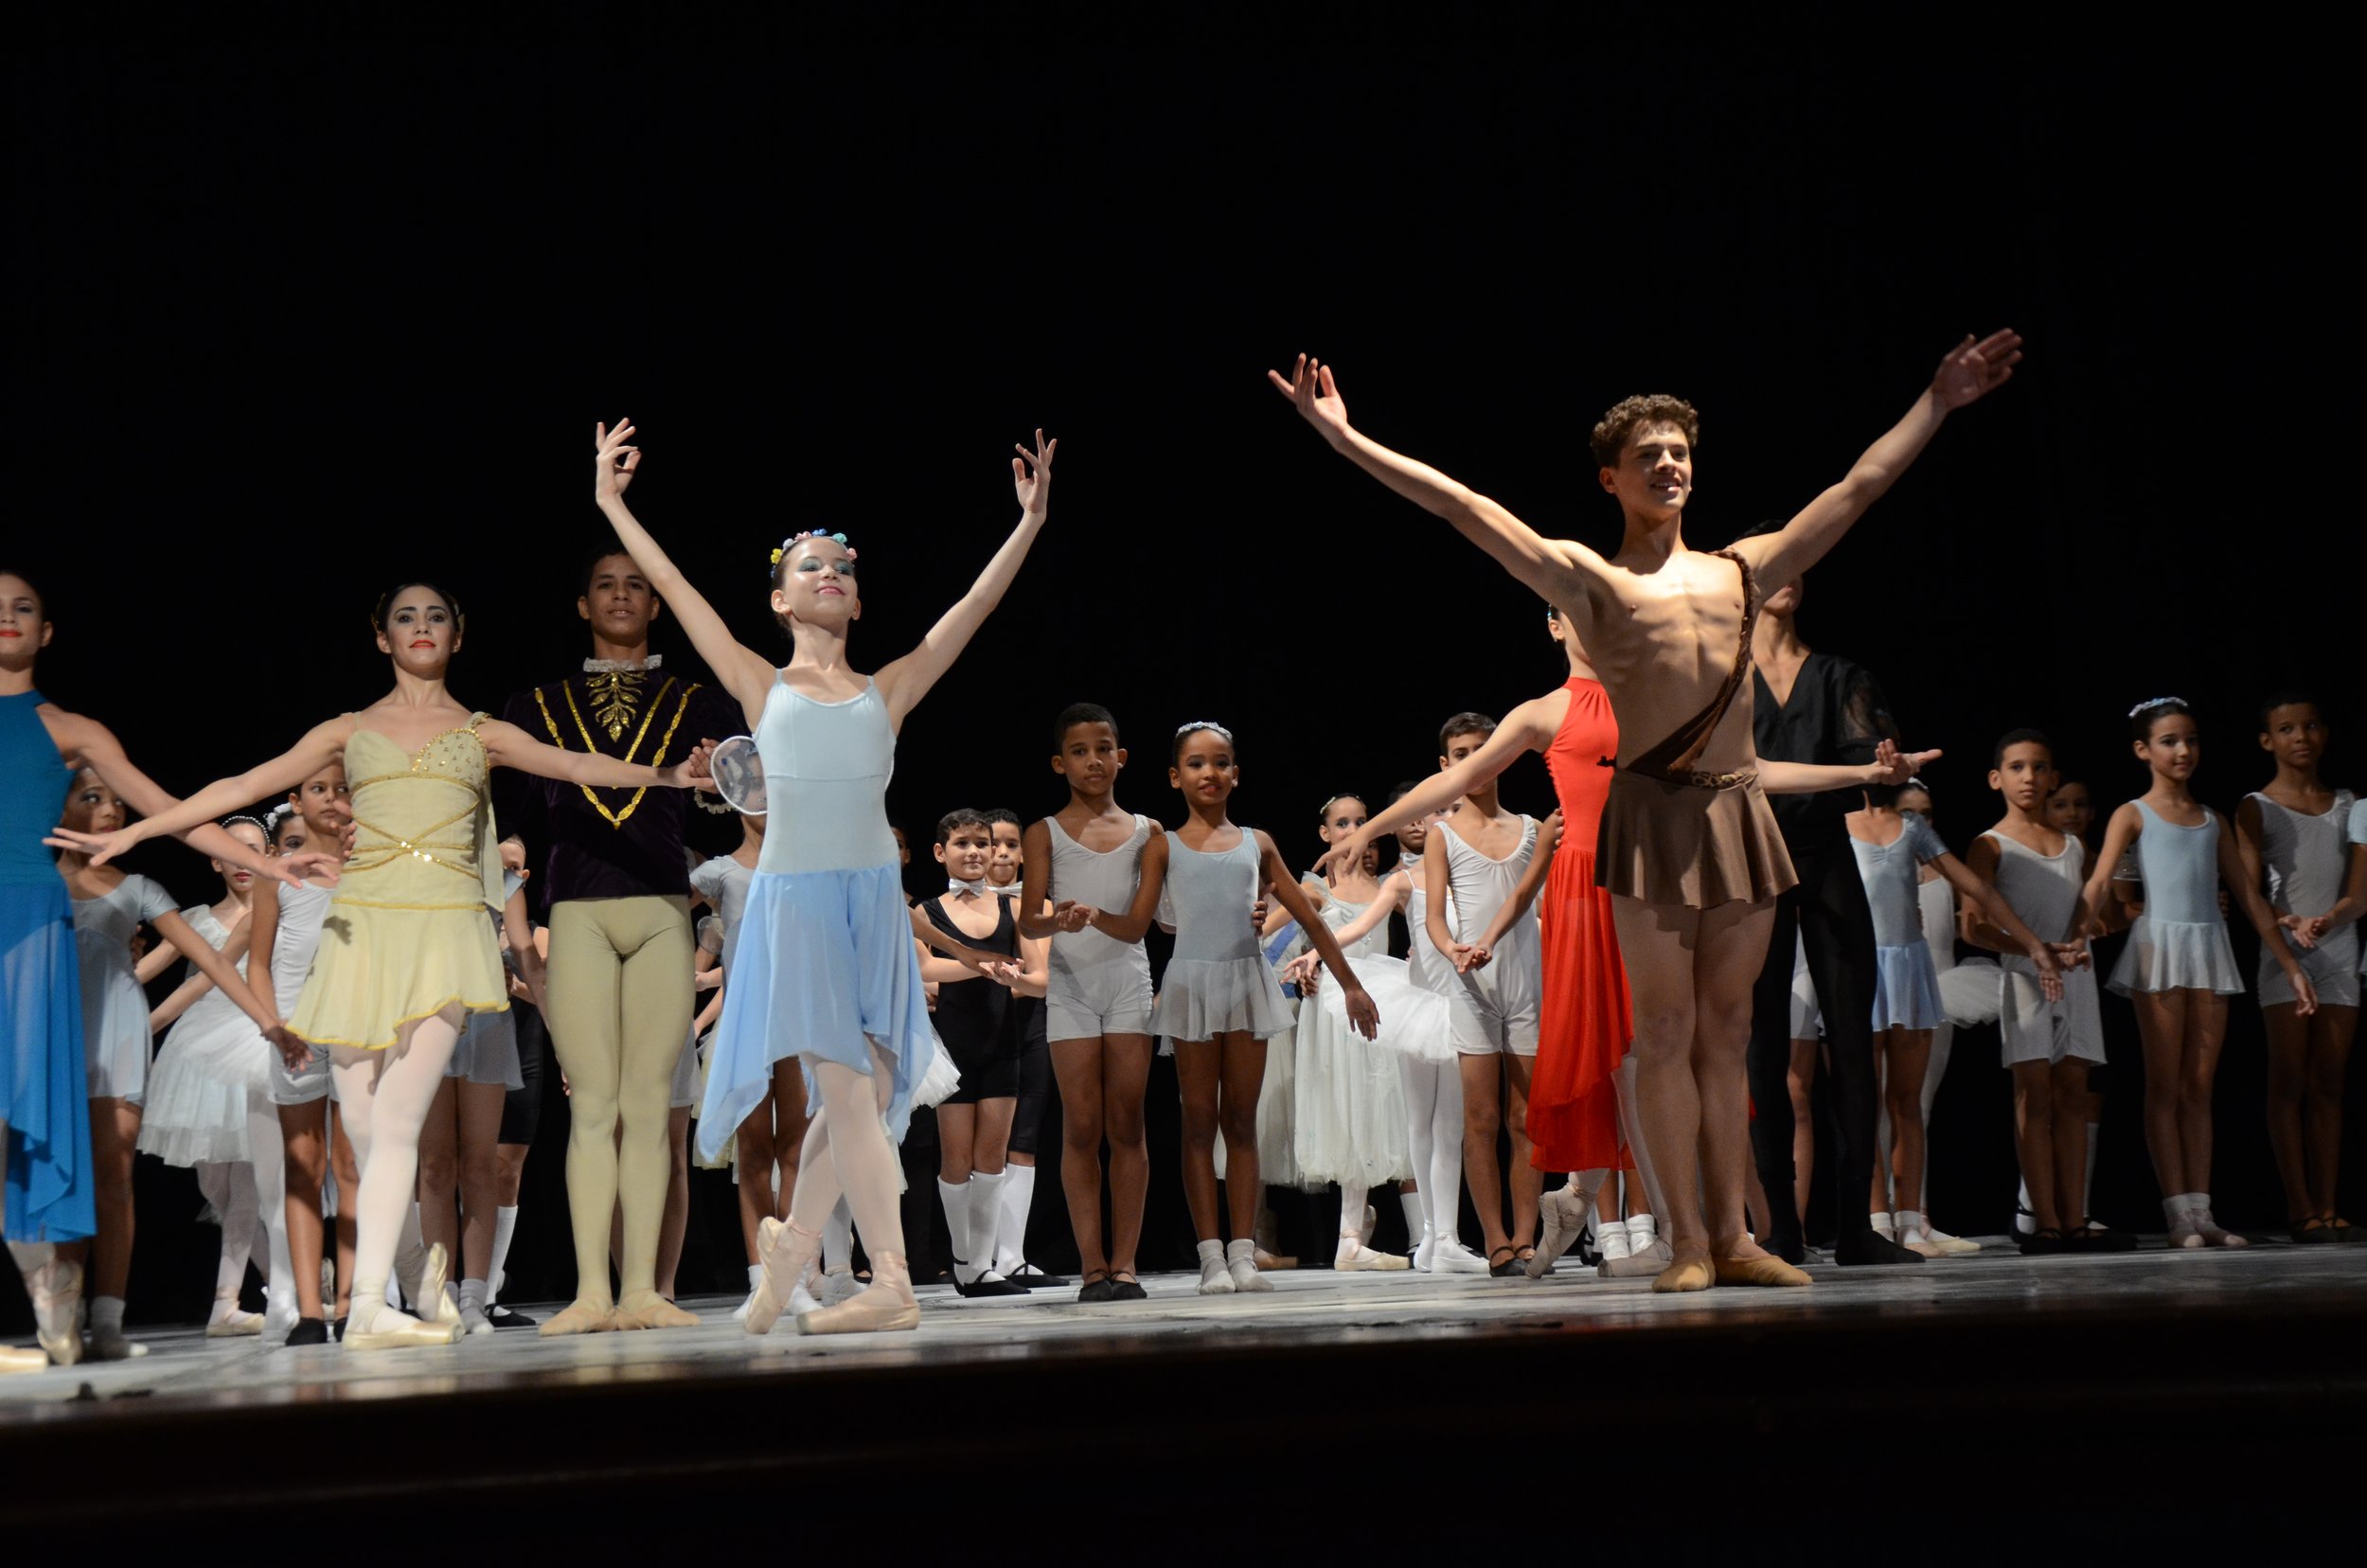 Alexis and his fellow students of the National Ballet School of Cuba 13 © Indyca.JPG